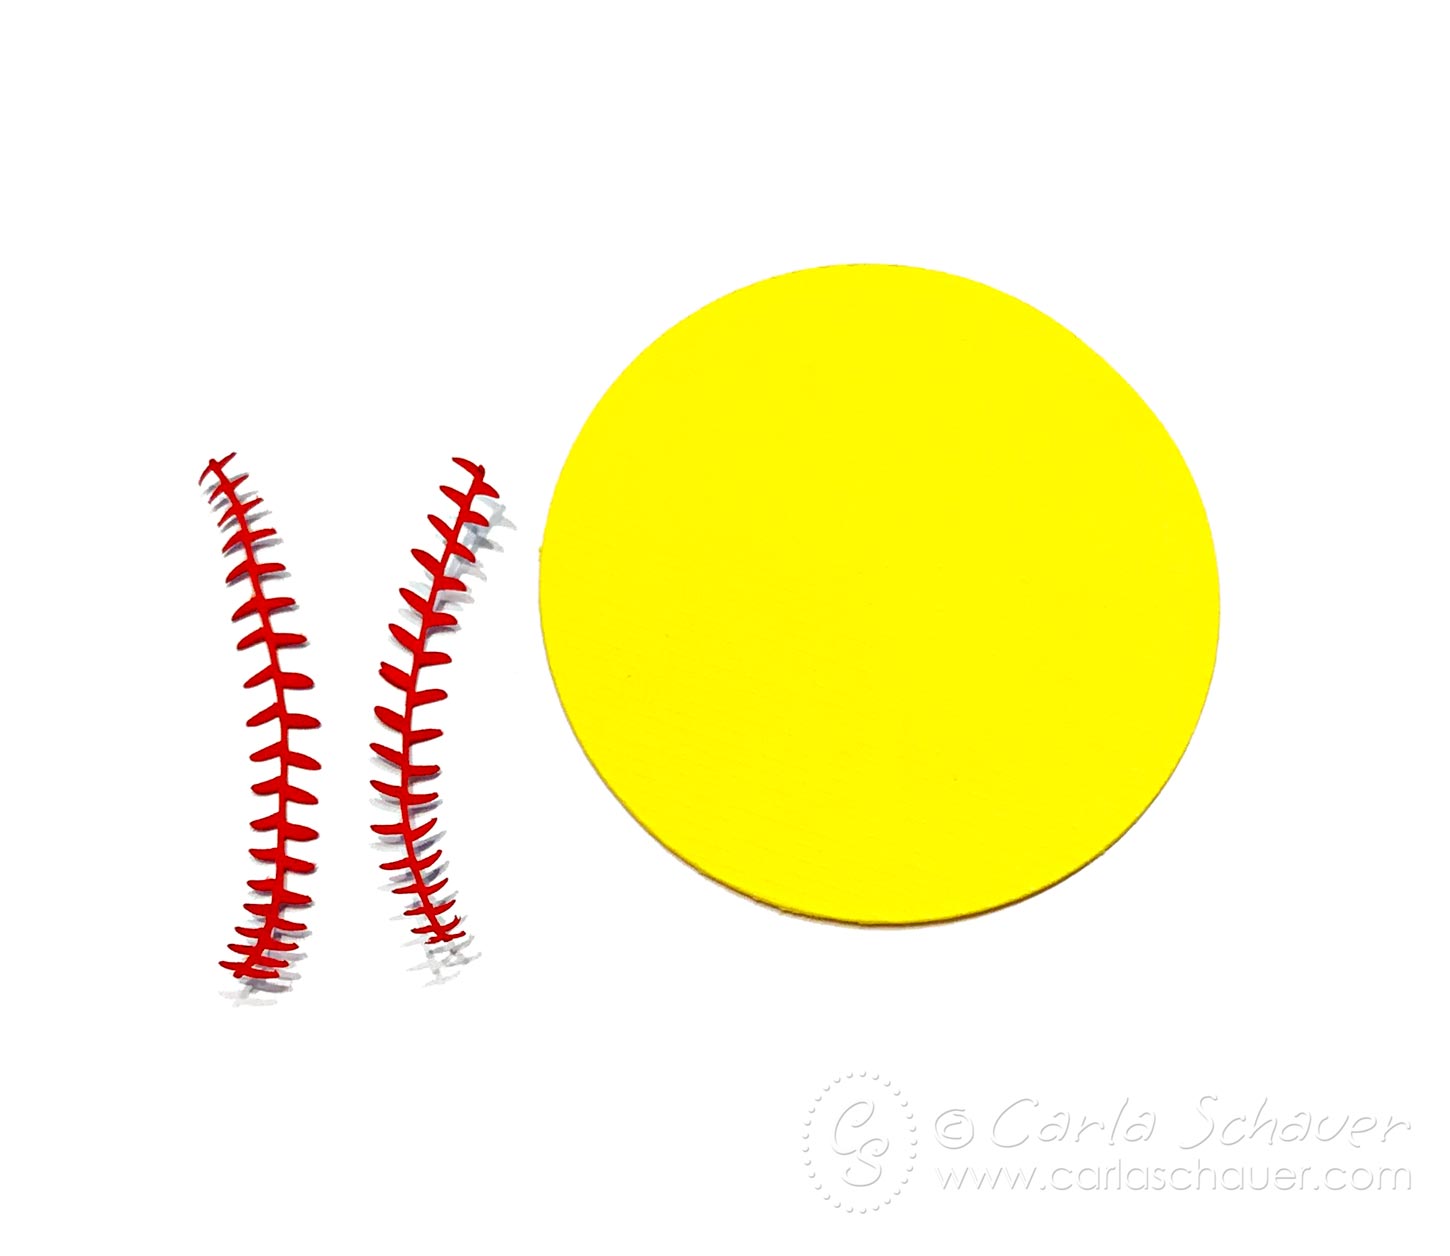 Cut softball pieces from colored cardstock to make softball crafts. | Free cutting file from Carla Schauer Studio